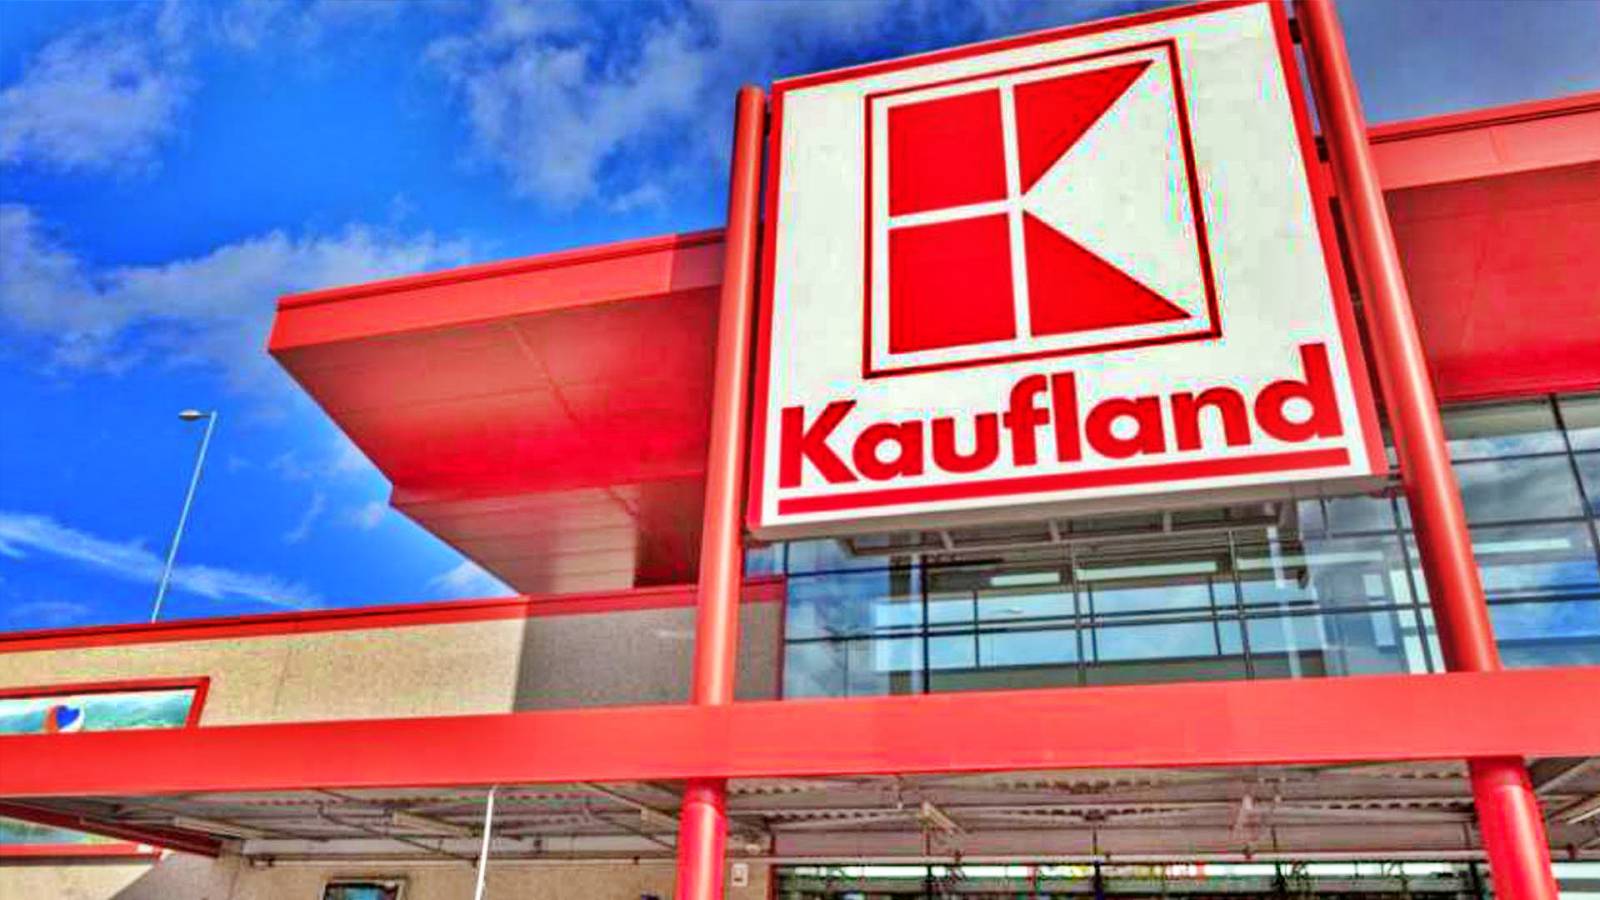 Kaufland LAST MINUTE Announcement Decided FREE to Romanians Today